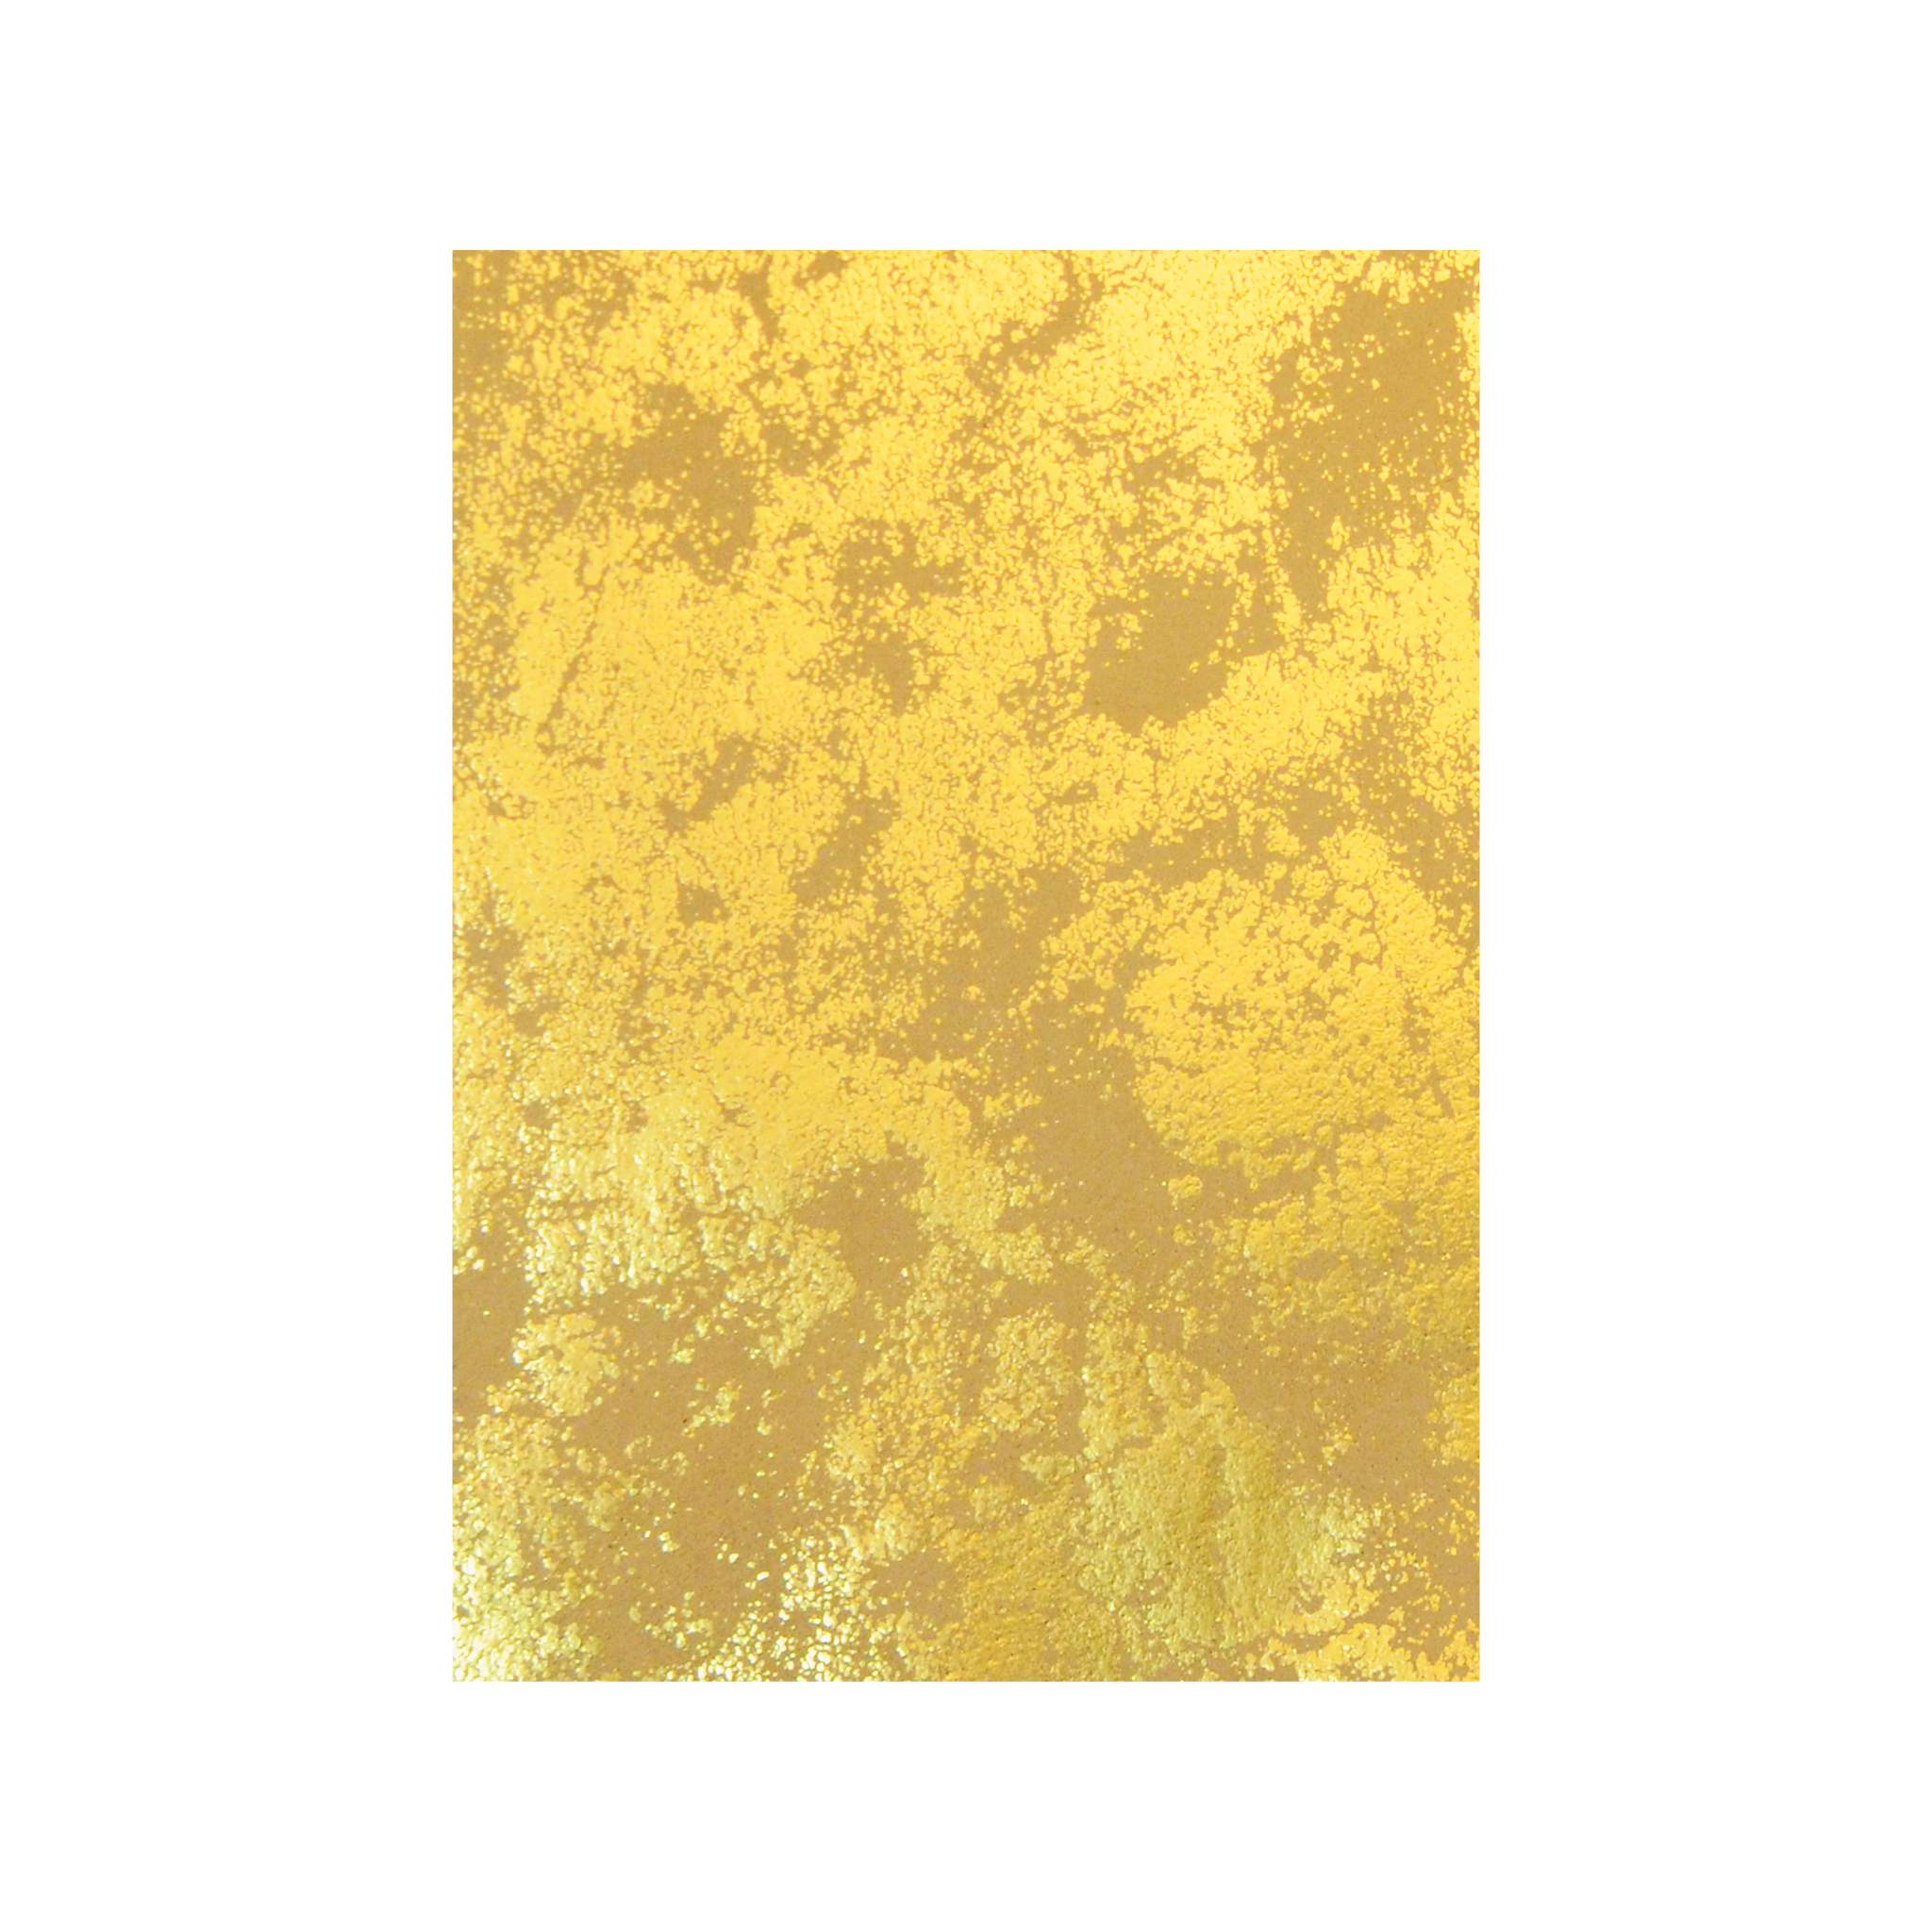 Swatch to show Expressions Metaillic Gold leather ideal for machine sewing garments, applique, purses and more